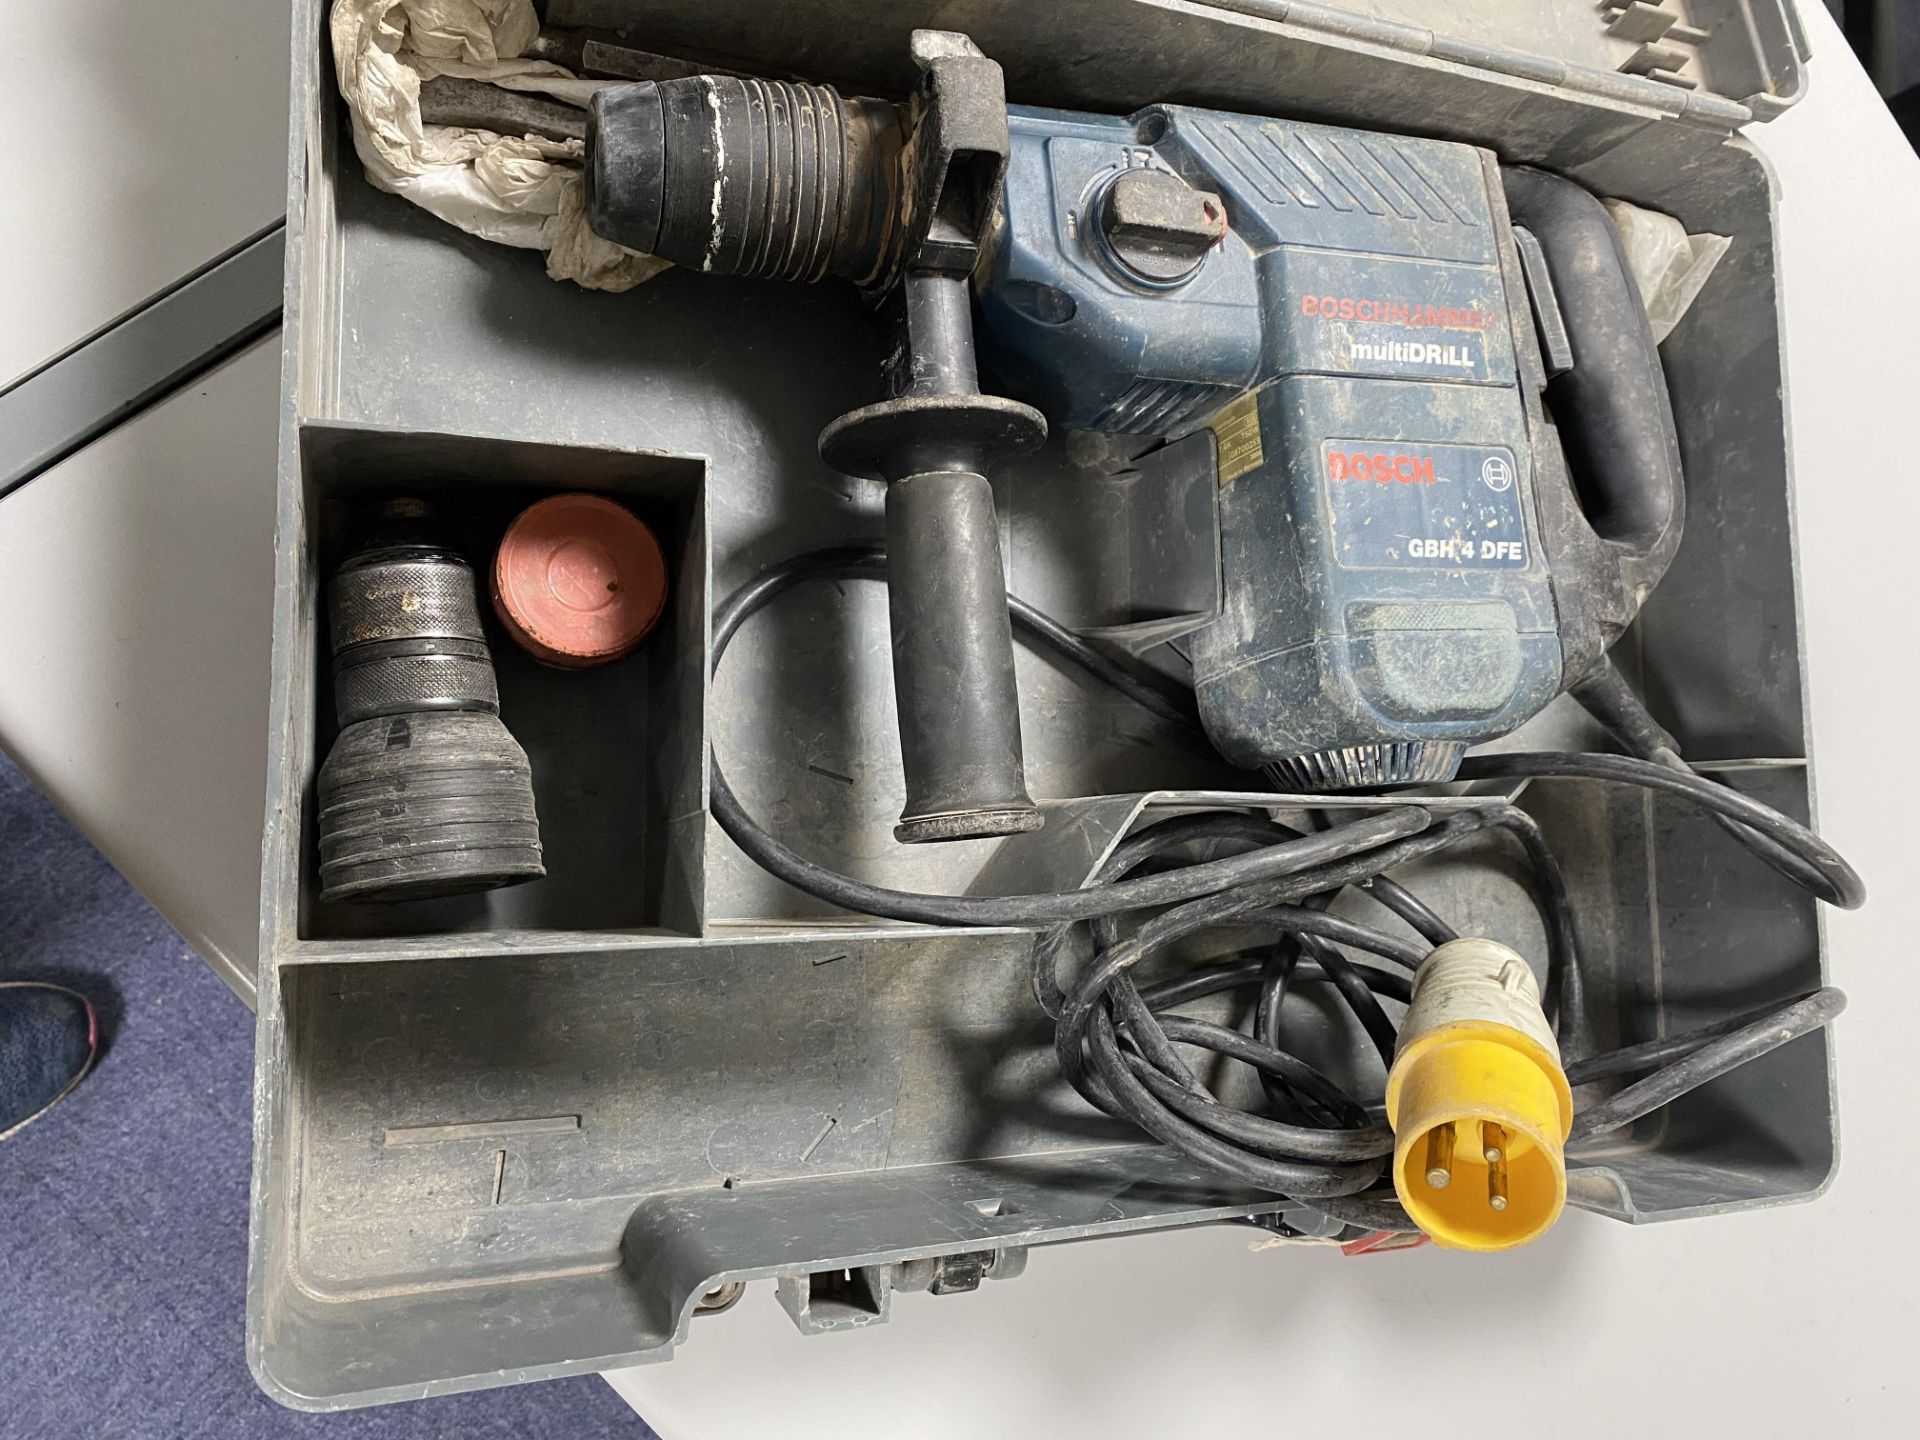 Boschhammer GBH 4 DFE 110v Multidrill with Carry Case and various parts as Shown - Image 2 of 6